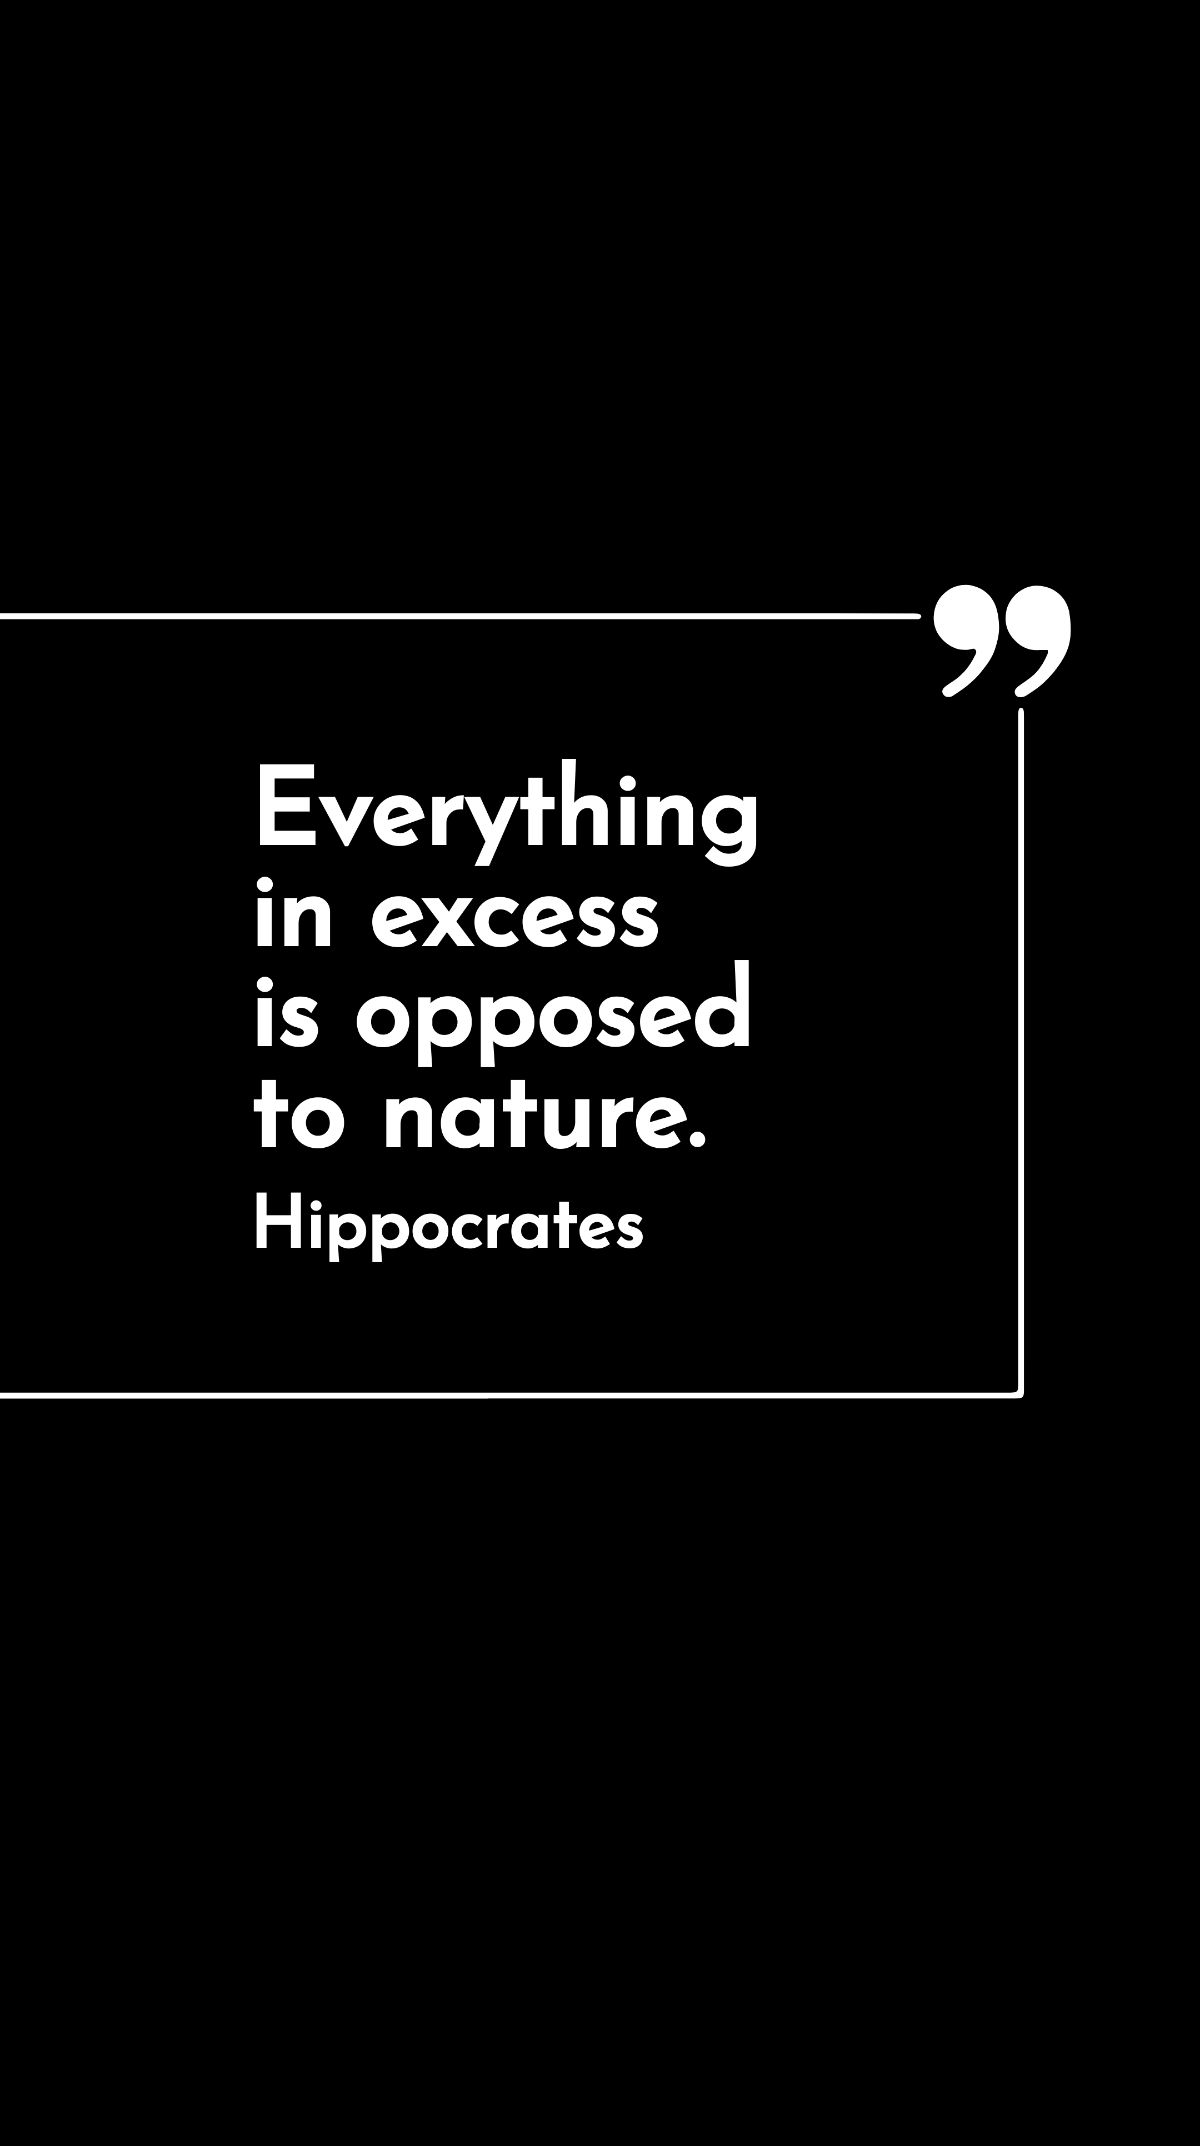 Hippocrates - Everything in excess is opposed to nature.